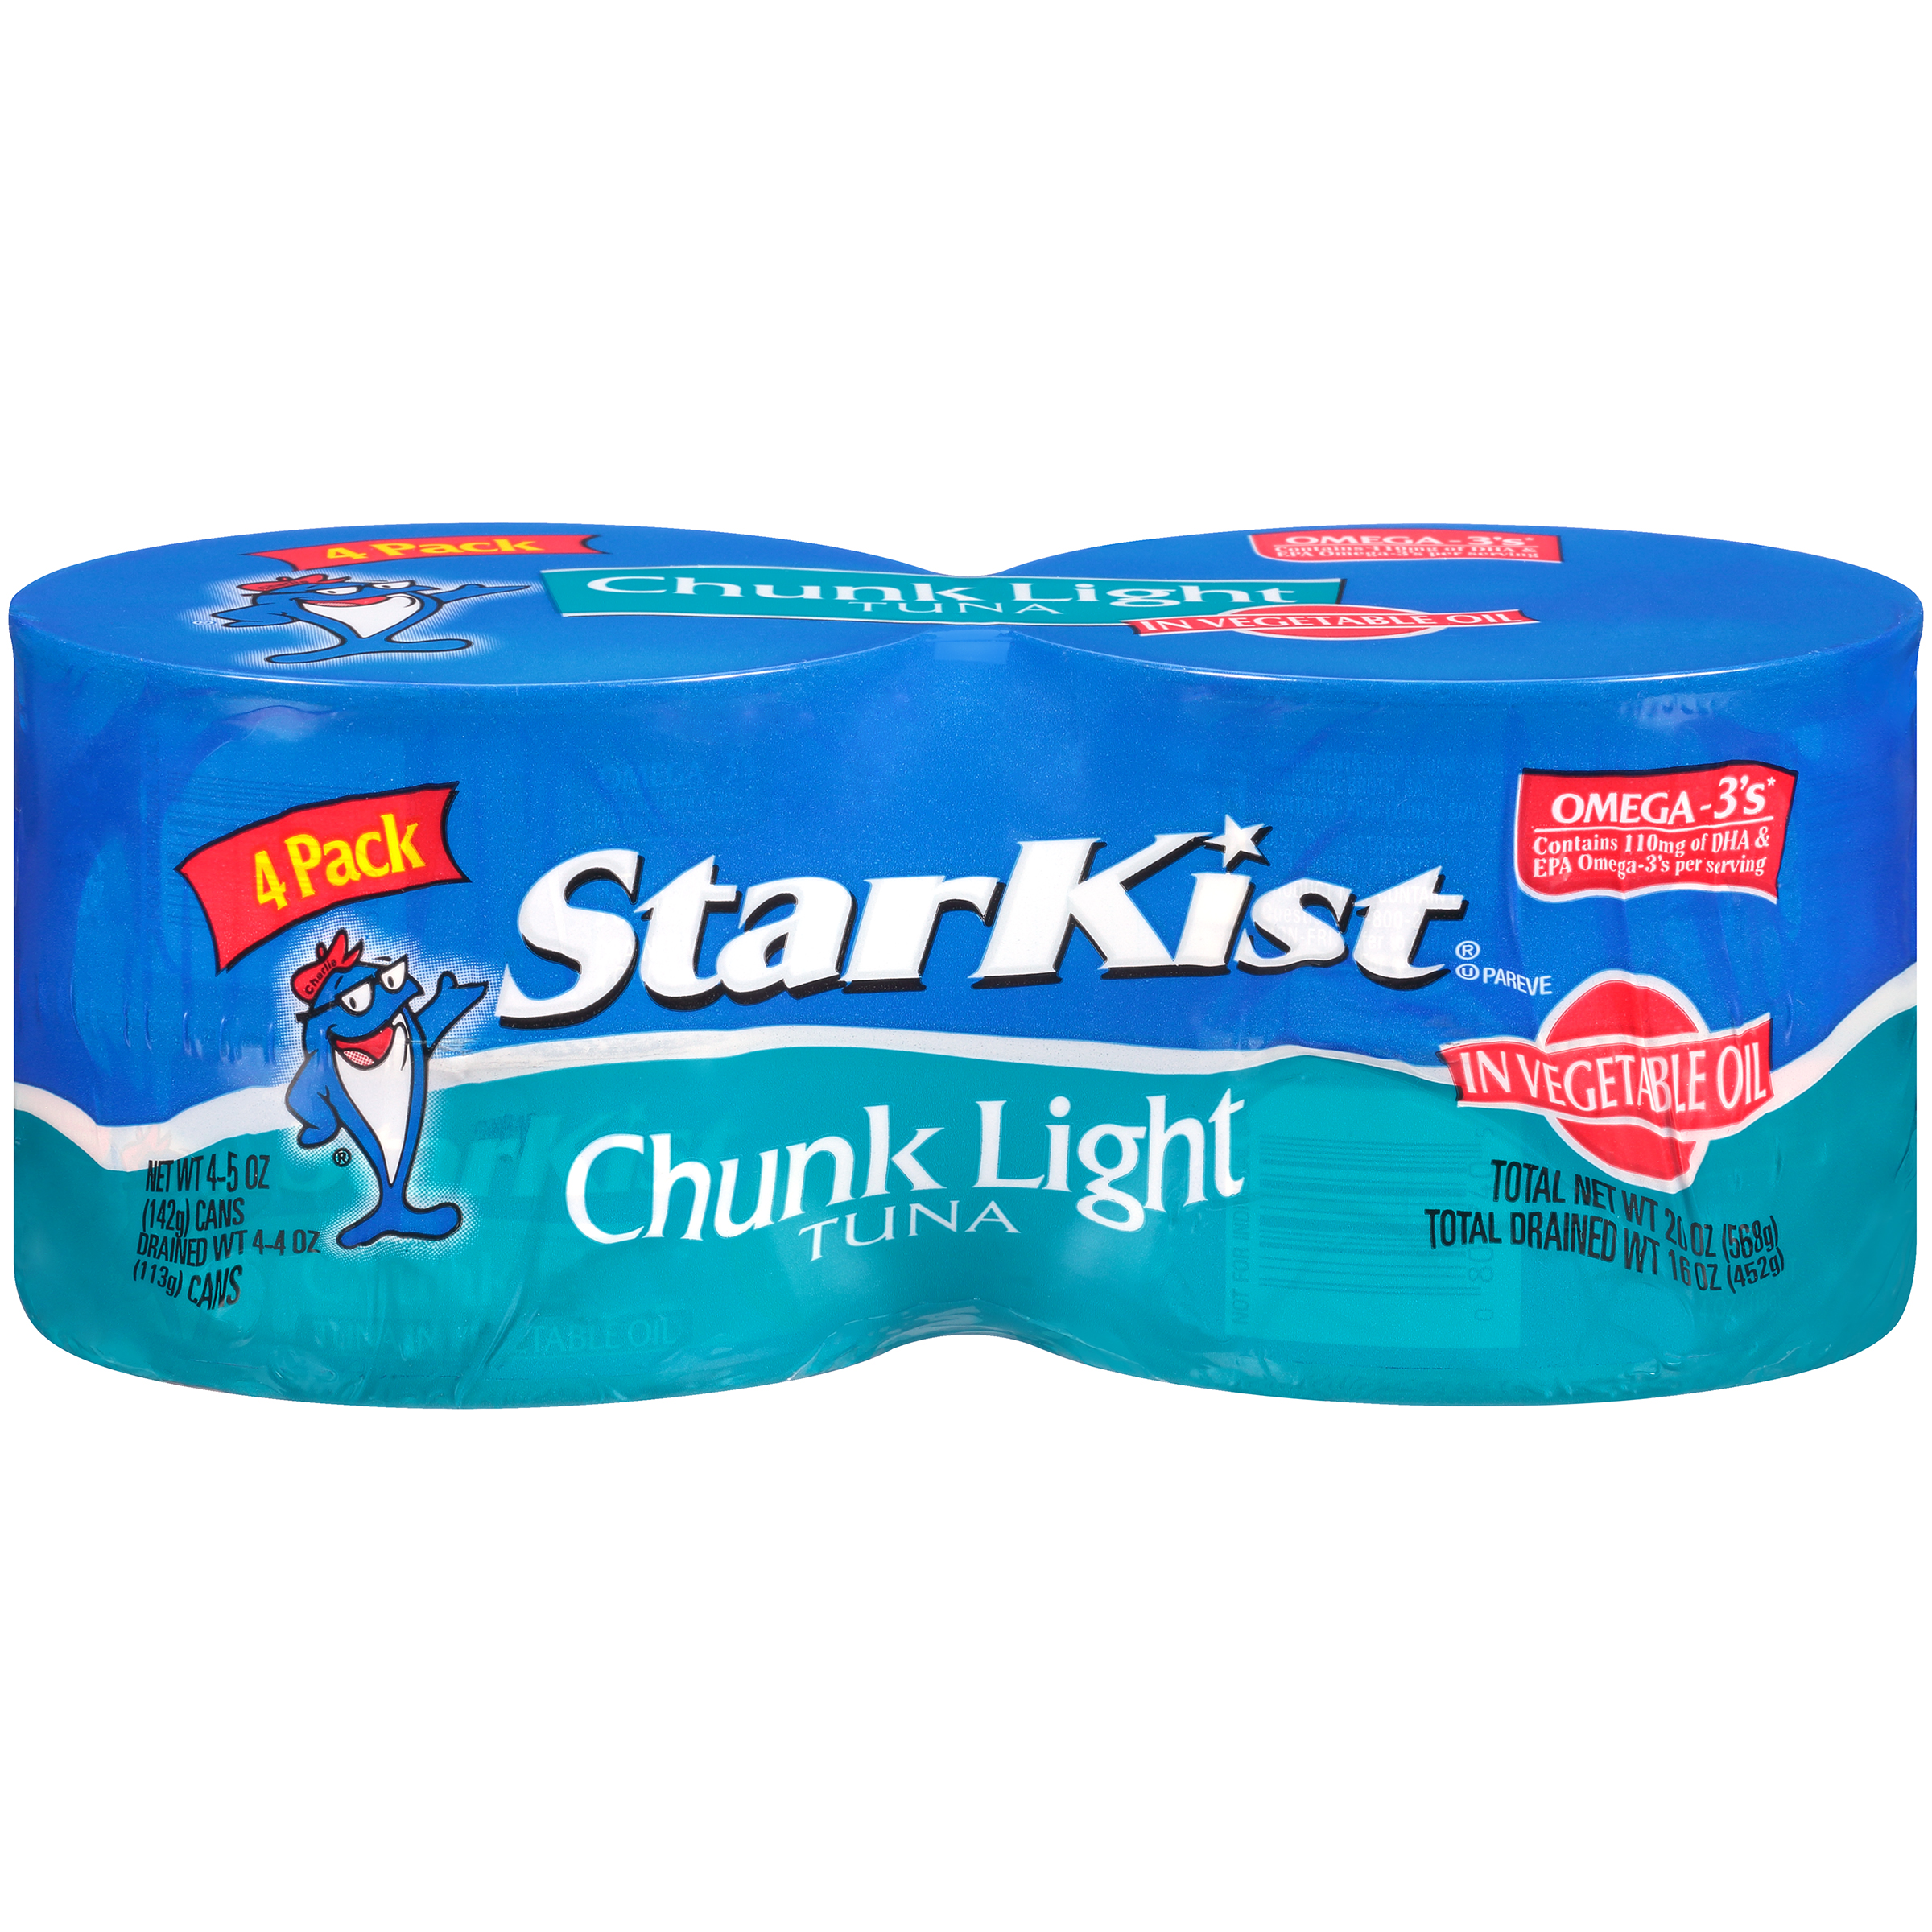 (4 Cans) StarKist Chunk Light Tuna in Vegetable Oil, 5 oz - image 1 of 4